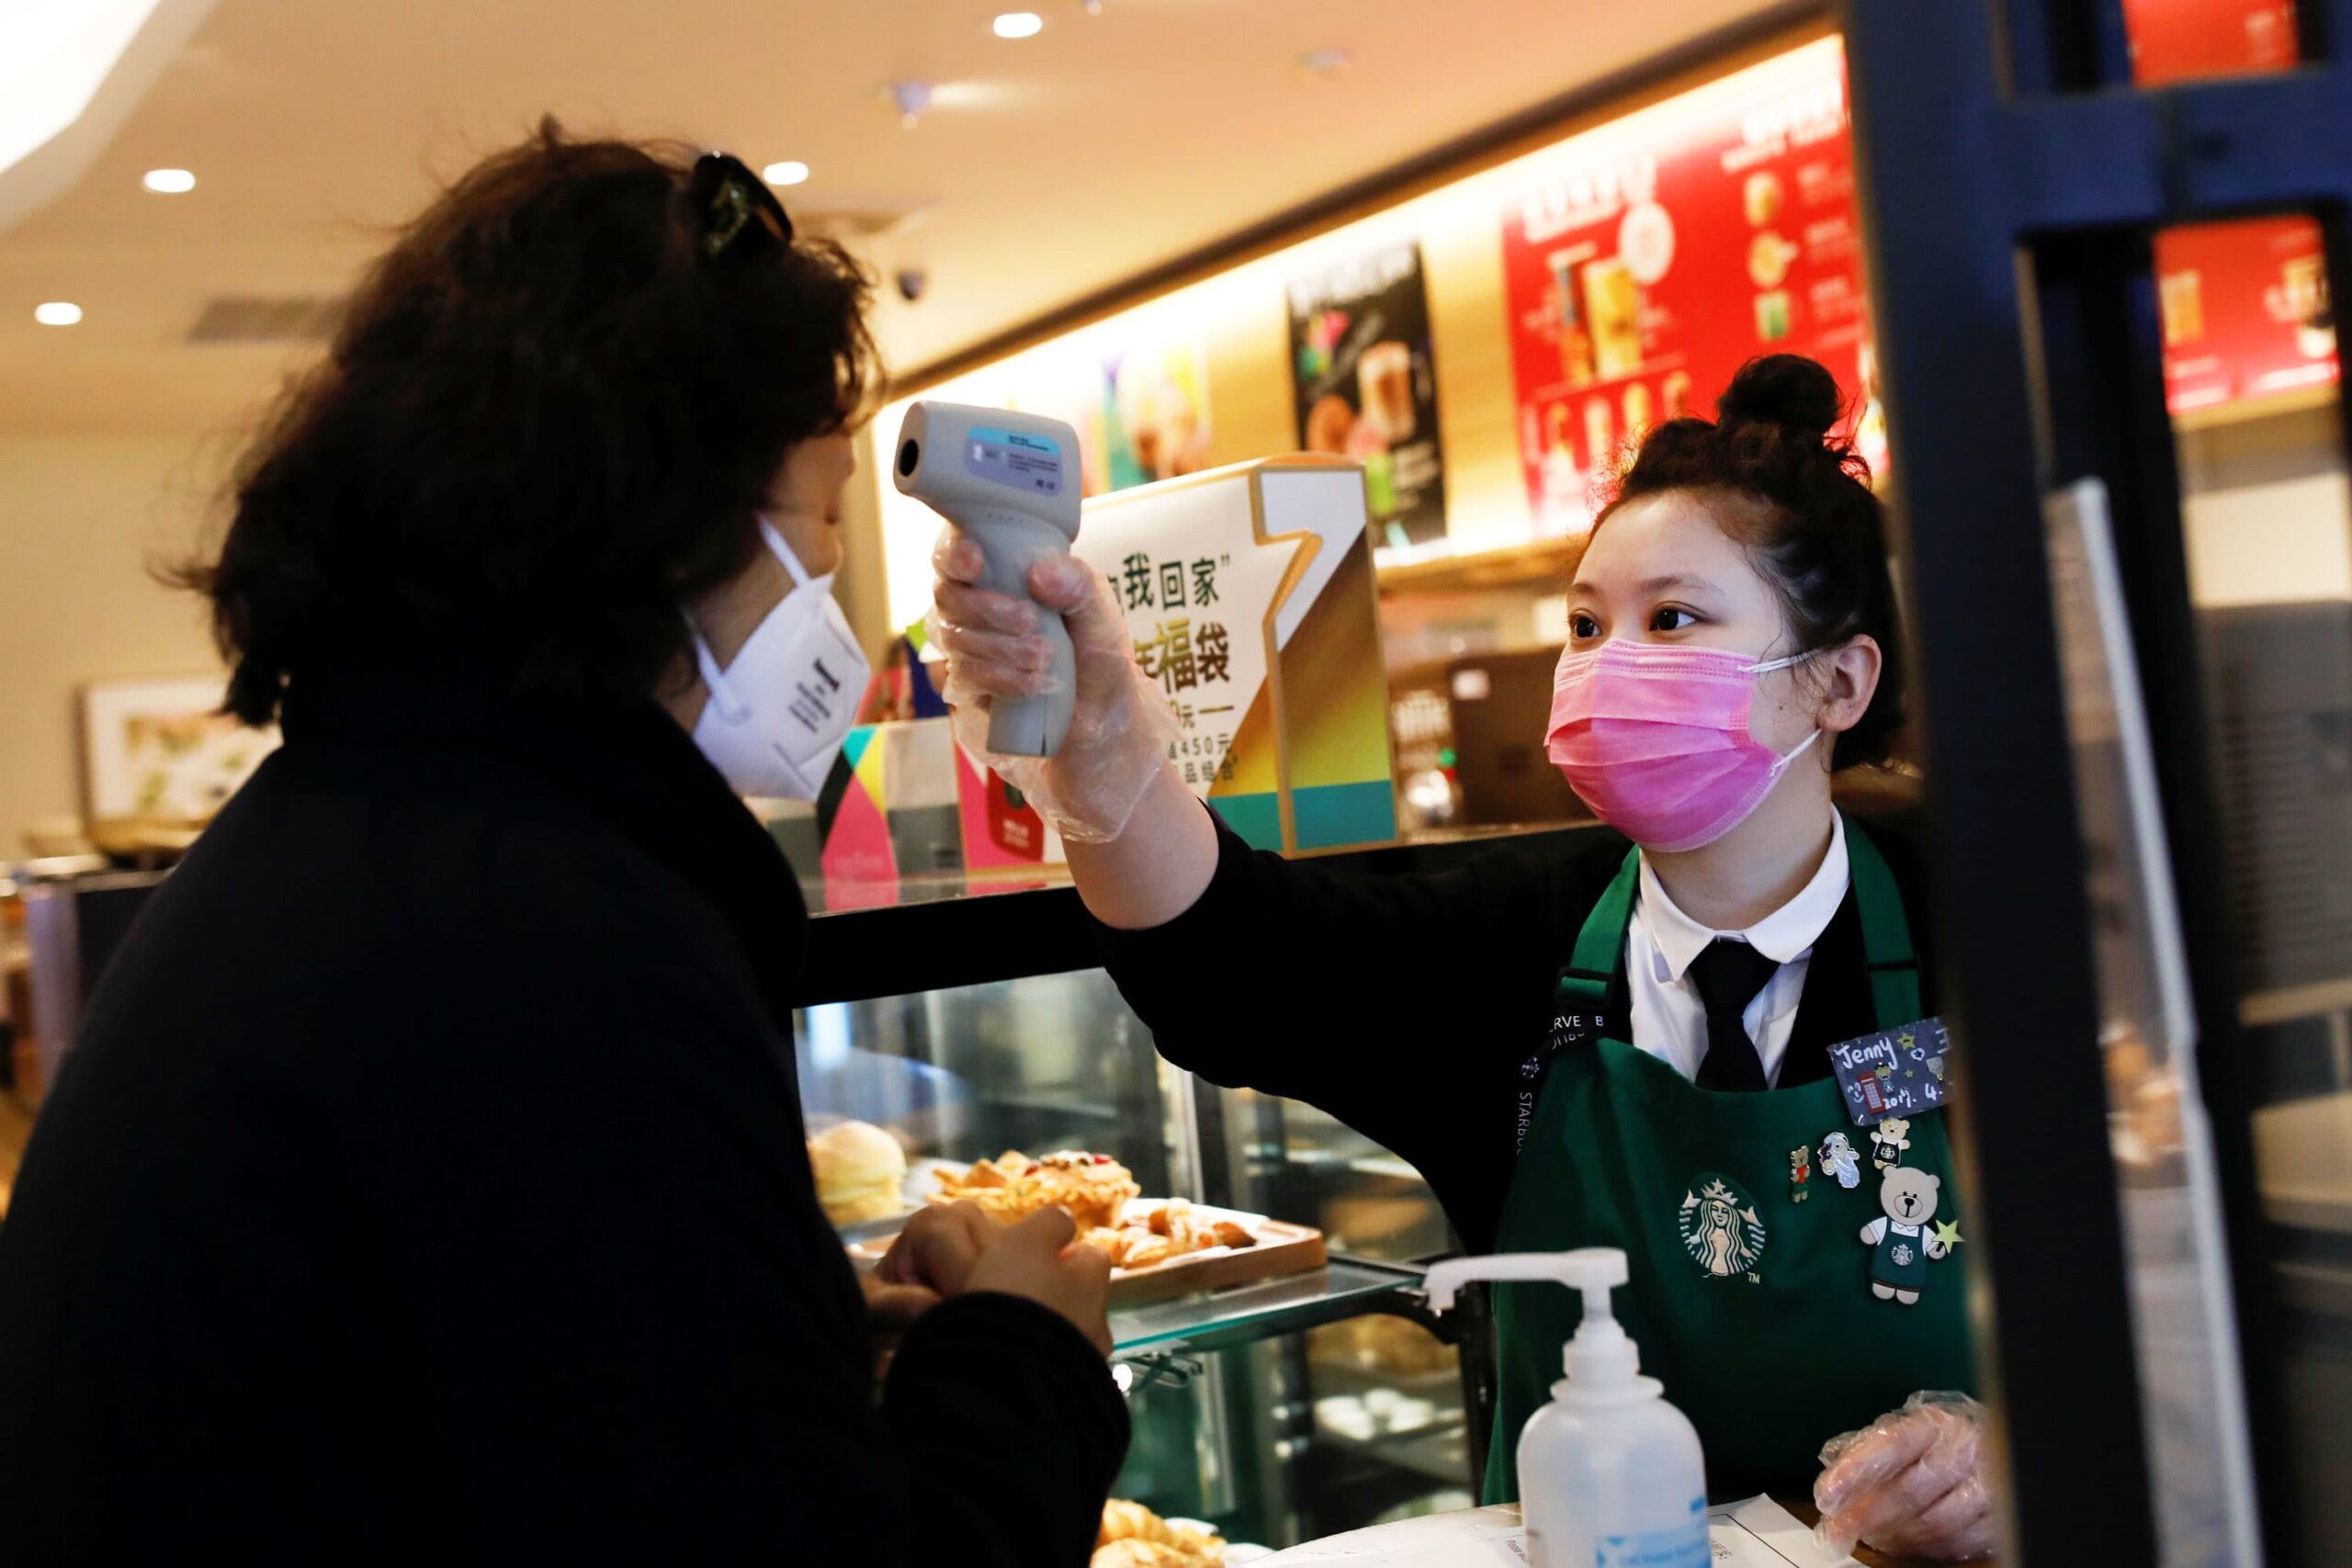 China says retail gross sales grew 17.7% in April, lacking expectations